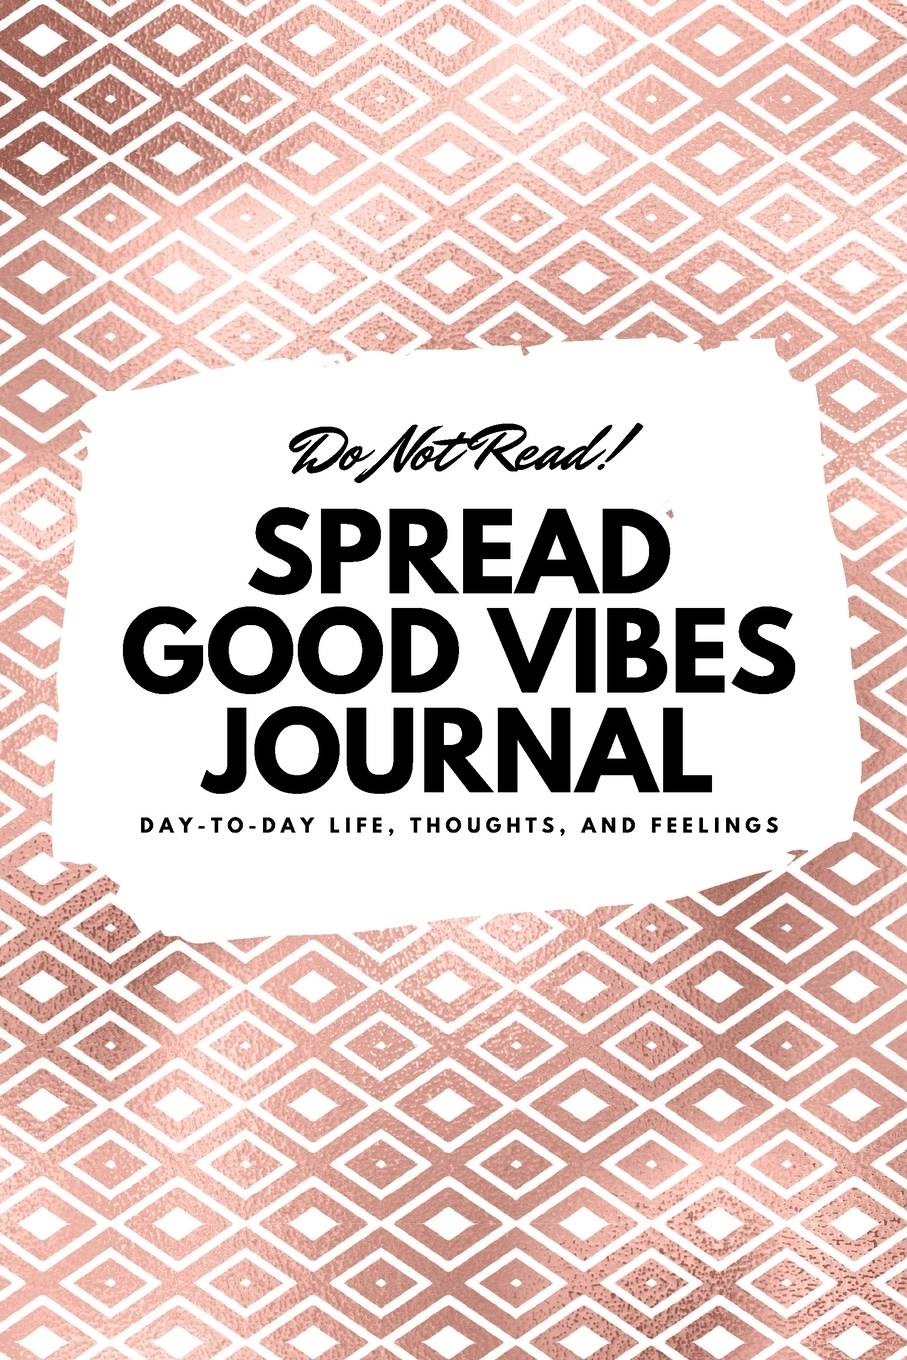 6x9 Blank Journal: Do Not Read! Spread Good Vibes Journal - Small Blank Journal - 6x9 Blank Journal (Softcover Journal / Notebook / Sketchbook / Diary) (Series #10) (Paperback) - image 1 of 1